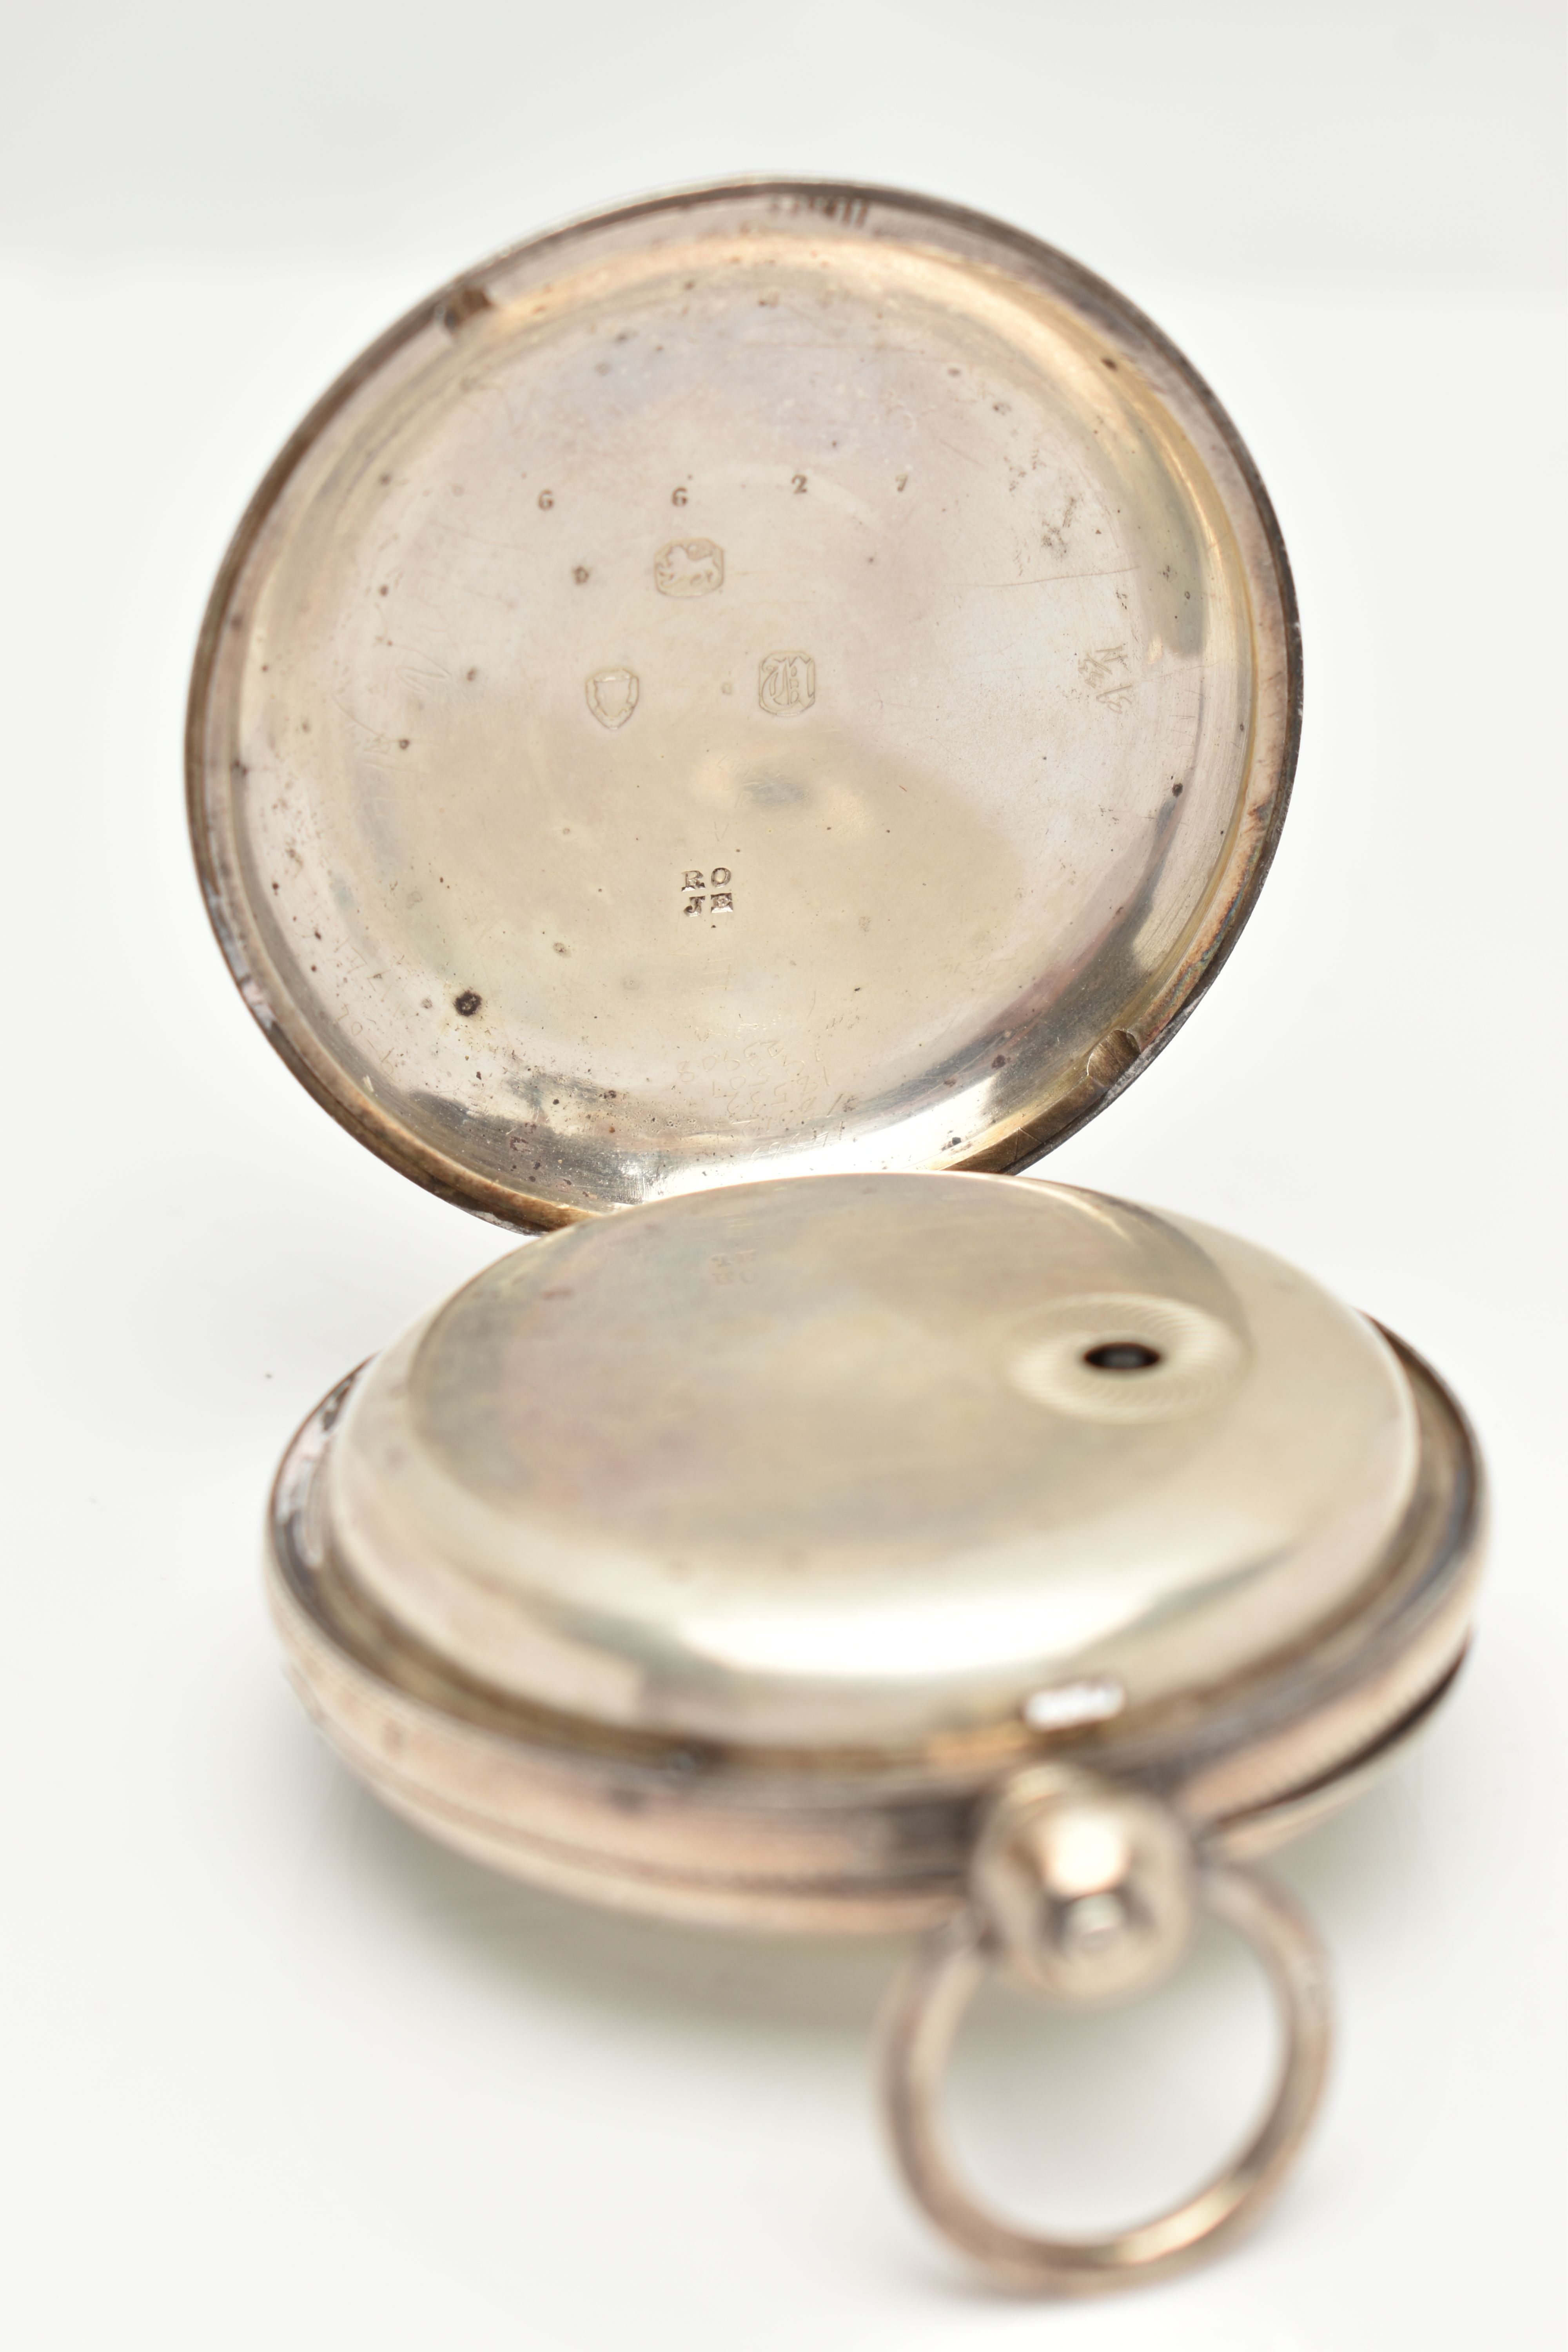 A SILVER OPEN FACE POCKET WATCH, key wound, round white dial, Roman numerals, subsidiary seconds - Image 4 of 6